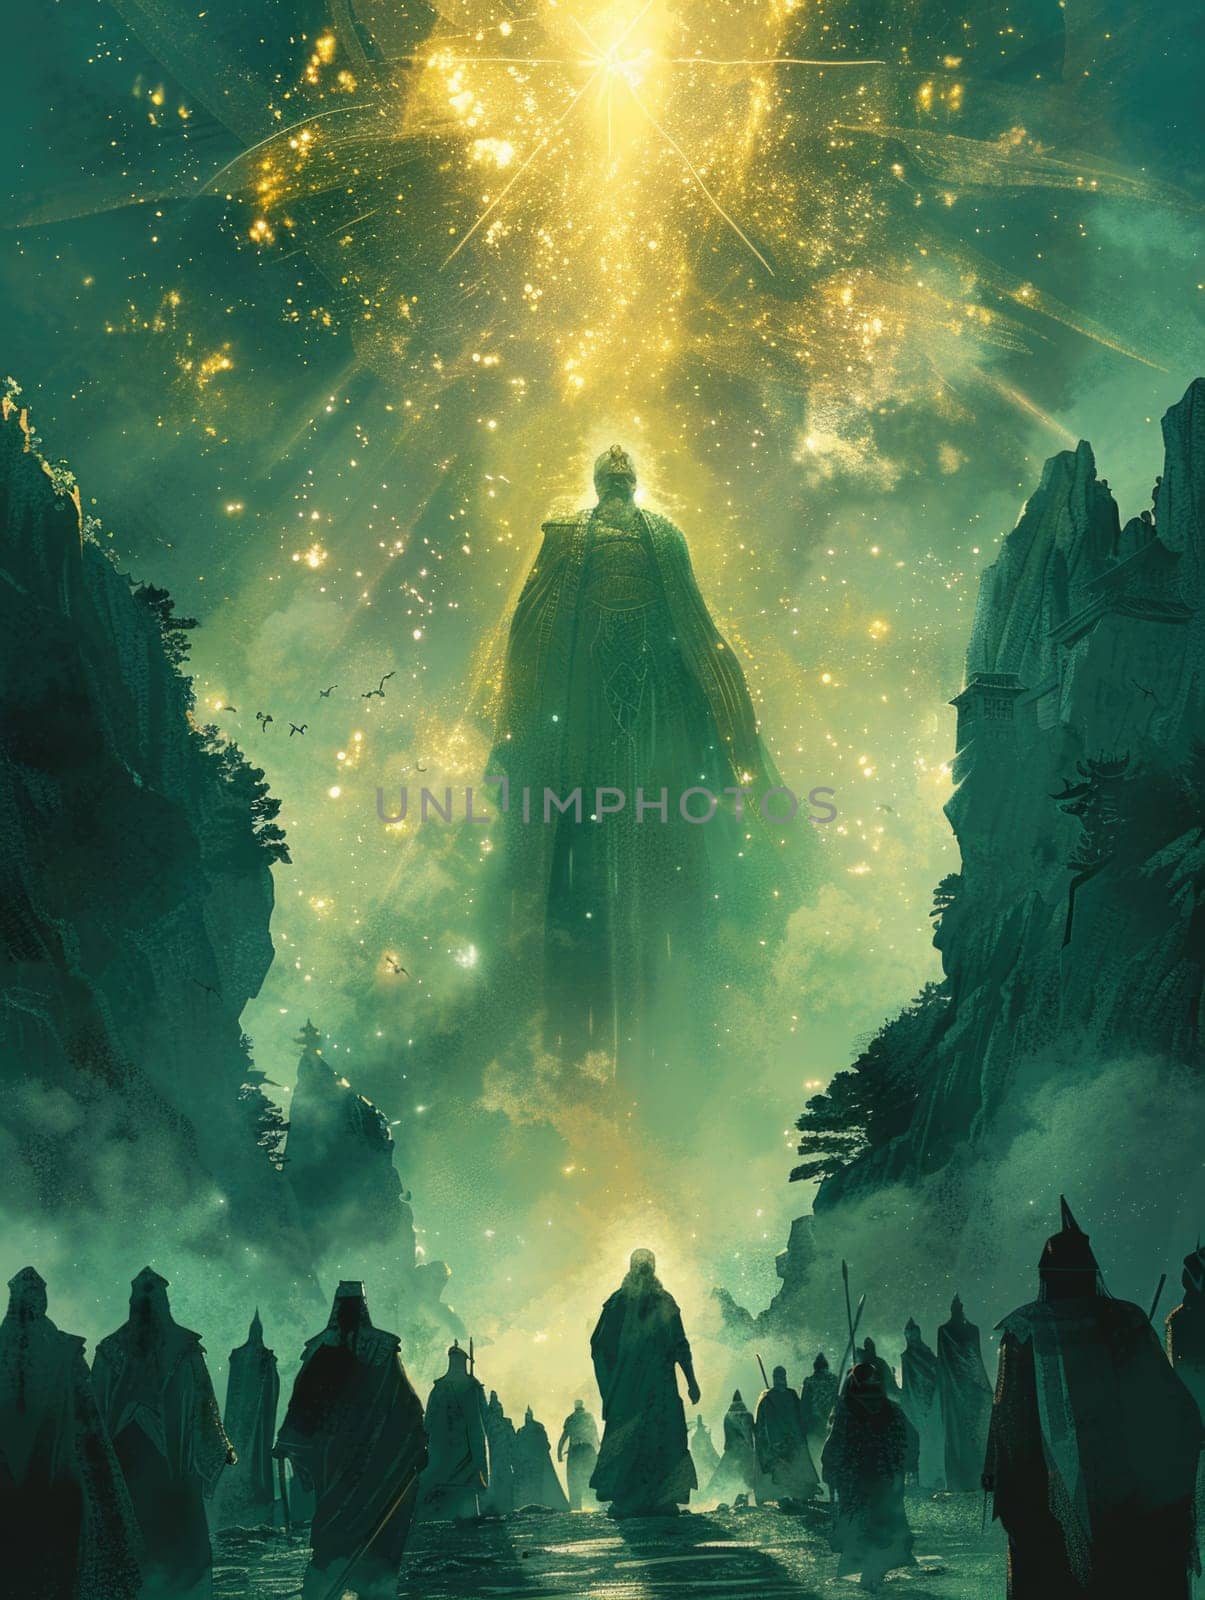 Movie poster featuring a man standing in a forest, embodying the spirit of an epic ruler of an ancient religion.